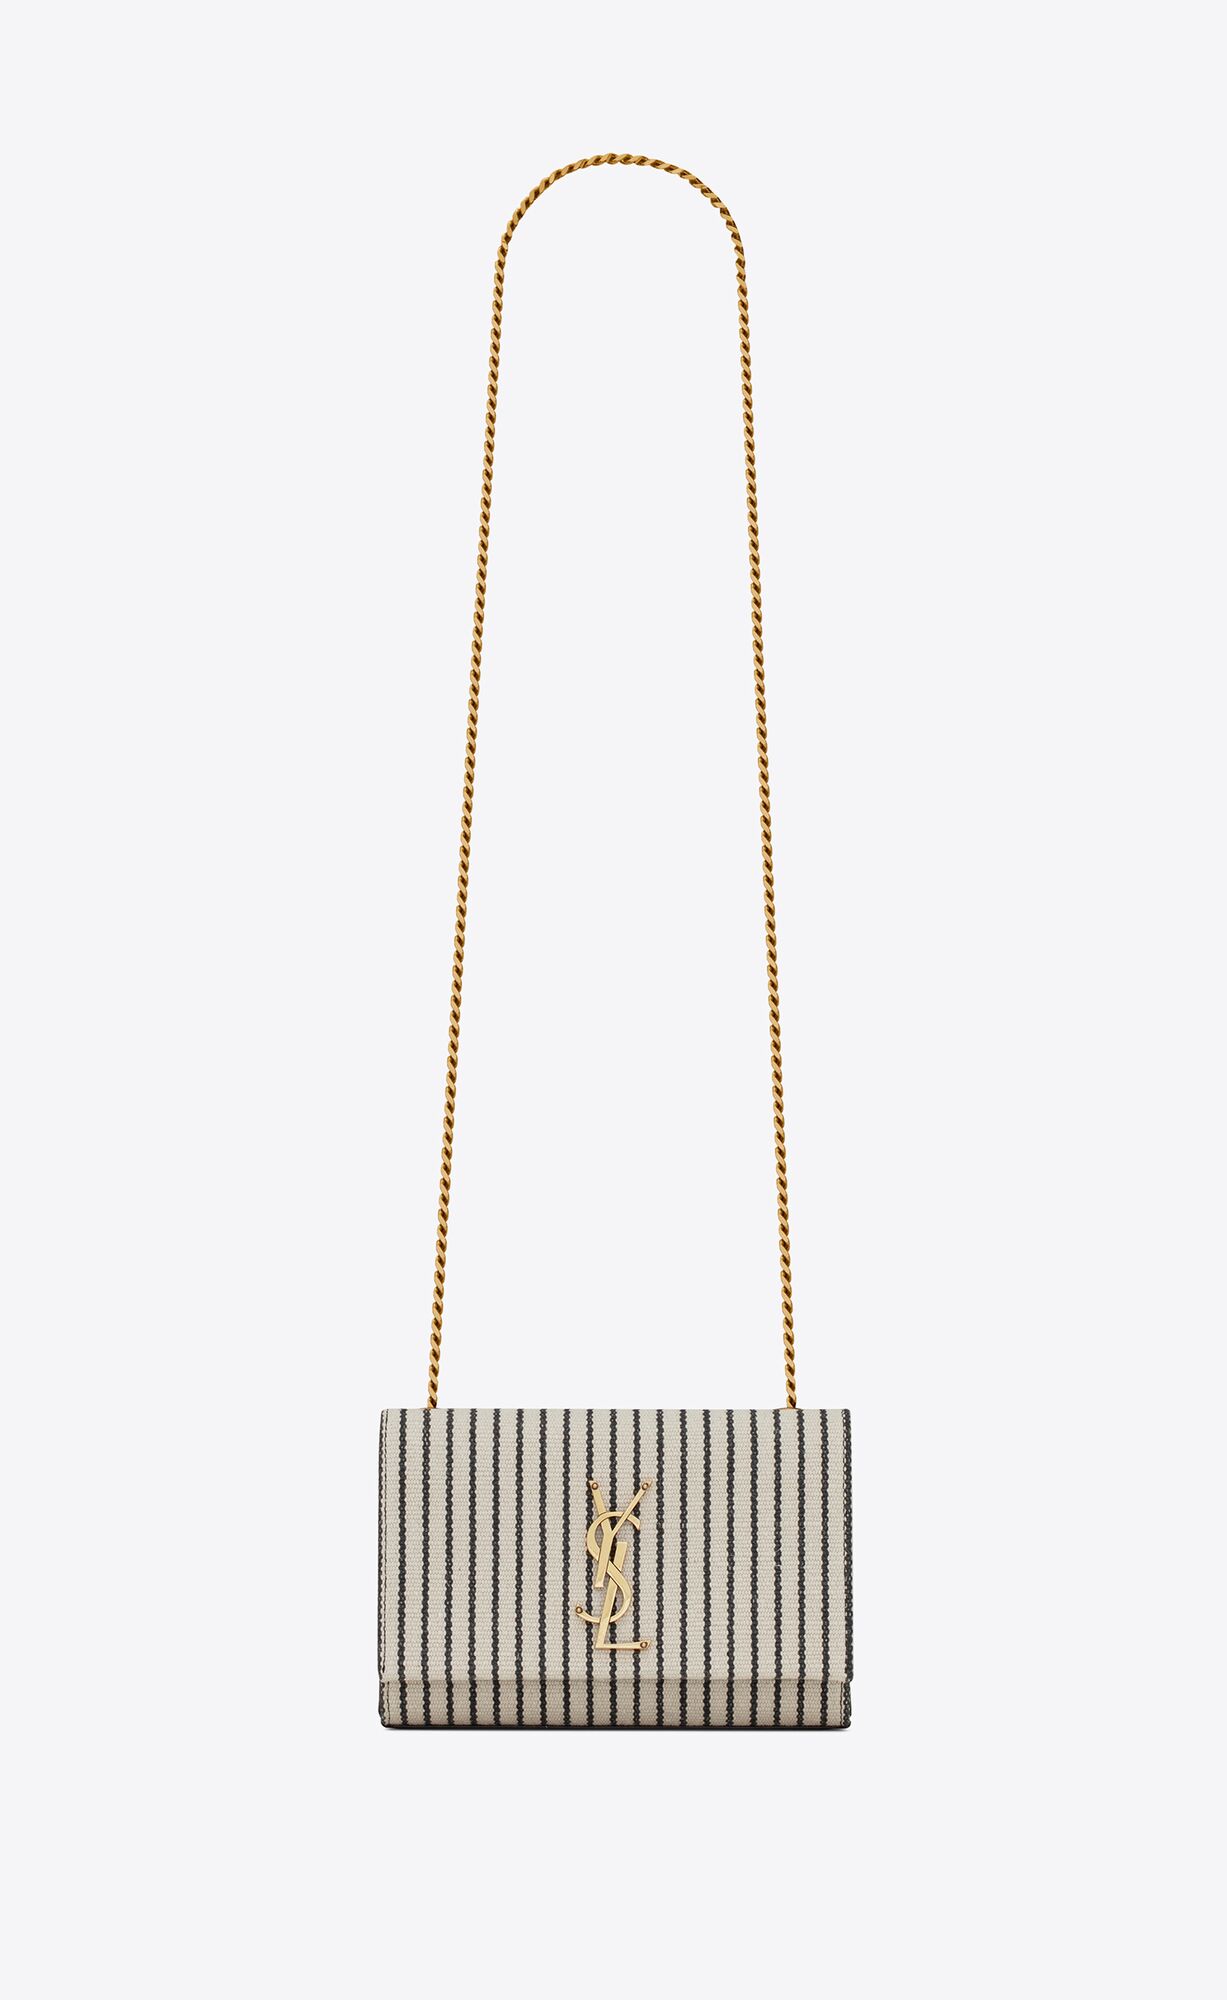 Saint Laurent Kate Small Chain Bag In Canvas And Smooth Leather – Cream Et Noir – 469390FAACG9583